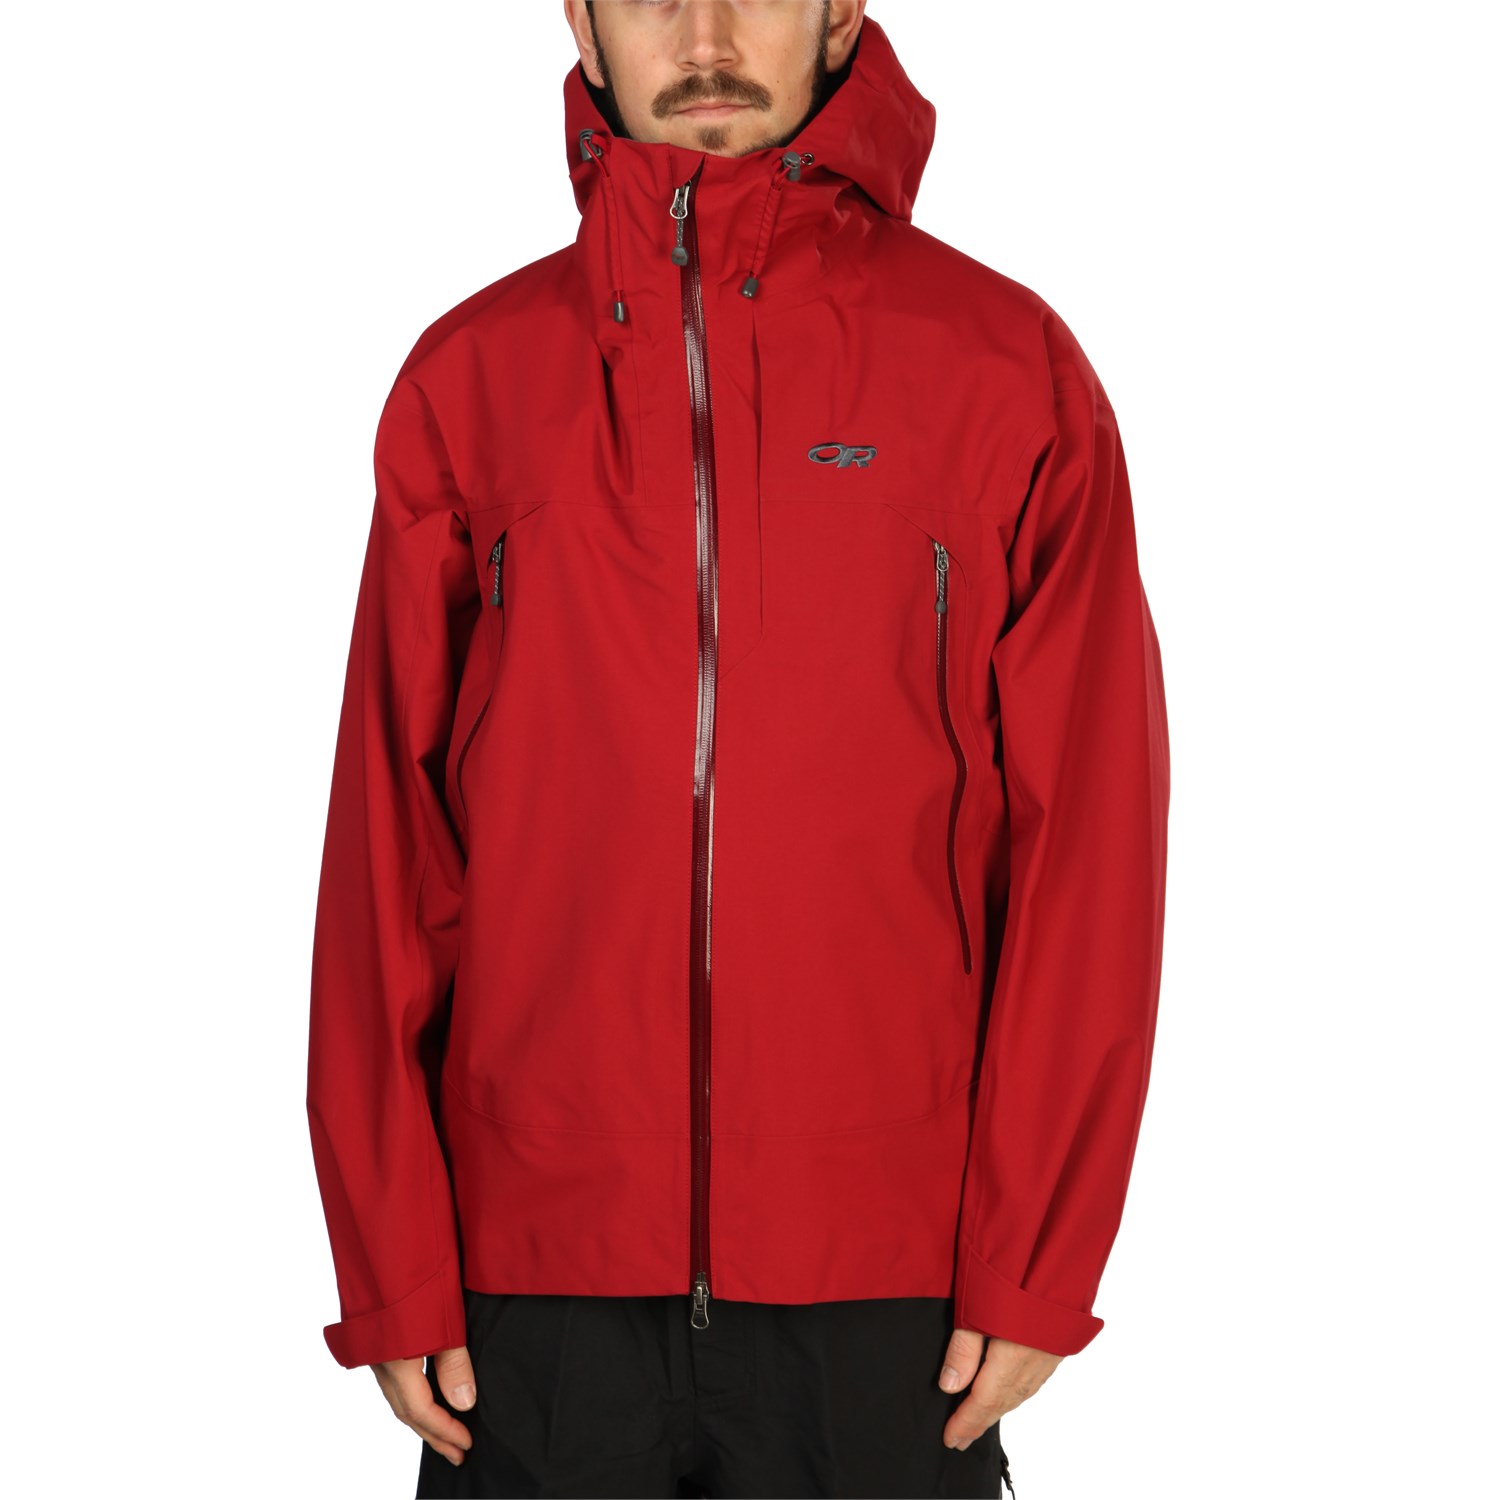 Outdoor Research Maximus Jacket | englishfor2day.com